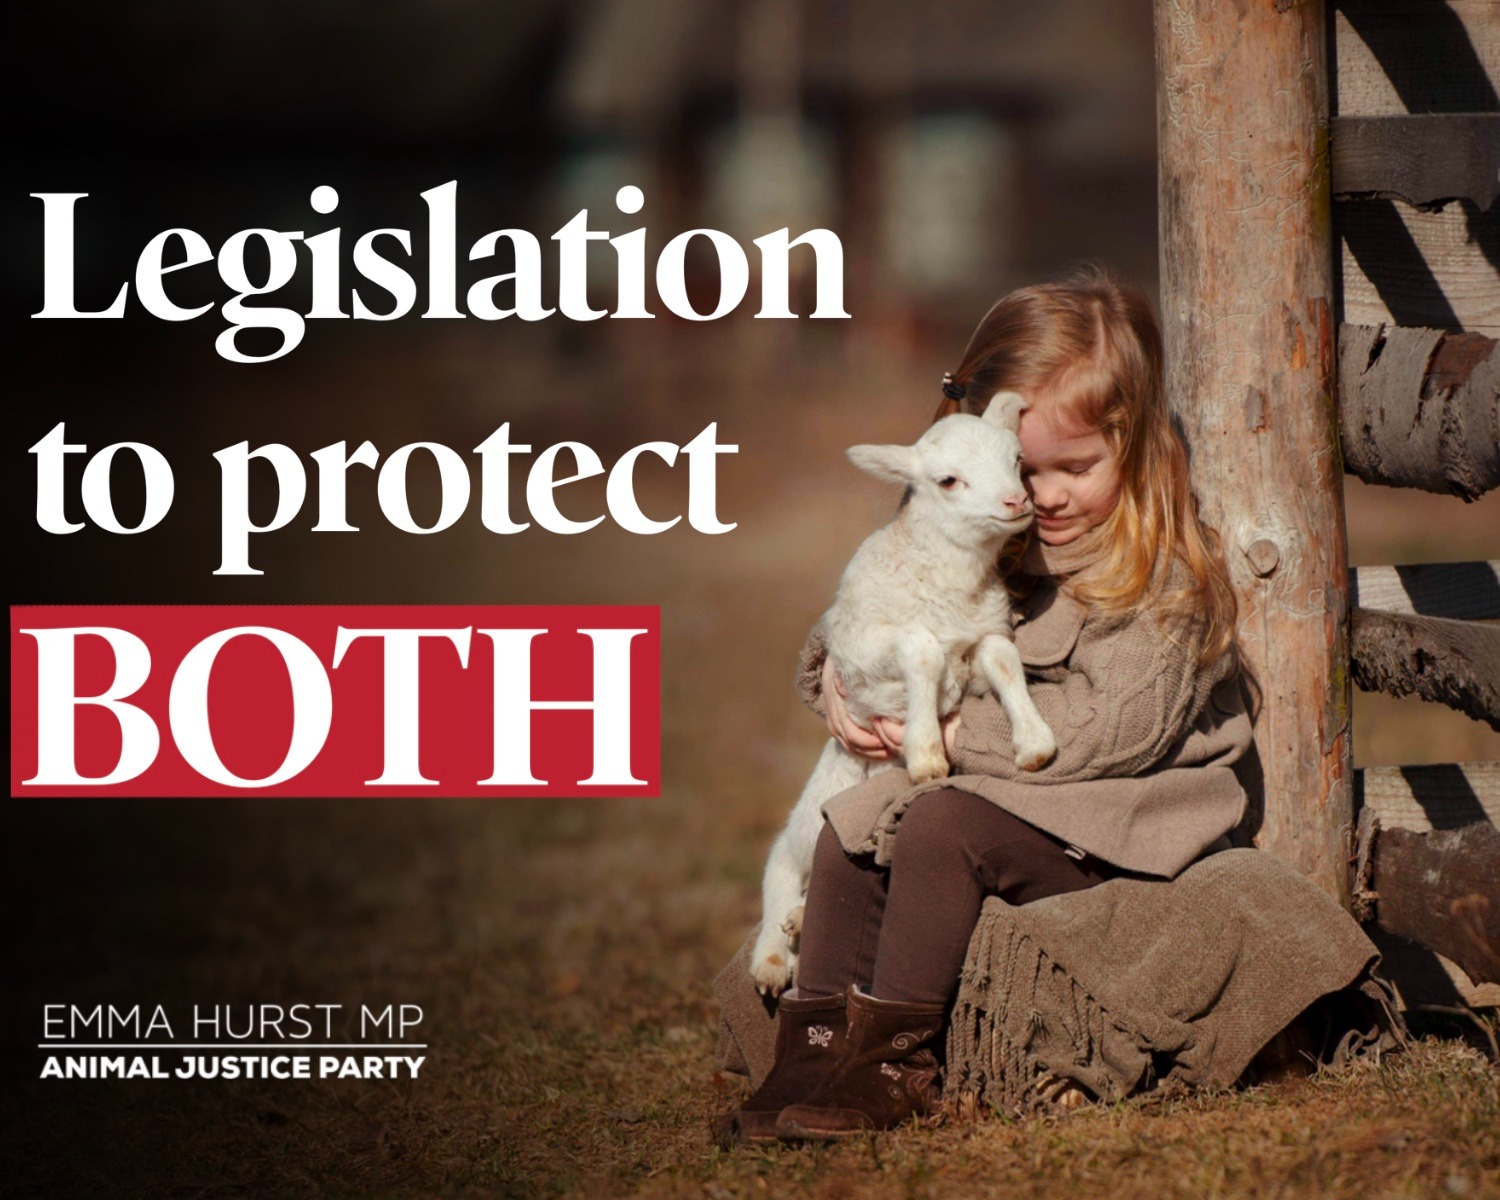 The Animal Justice Party is campaigning for laws that prevent convicted animal abusers from working with children